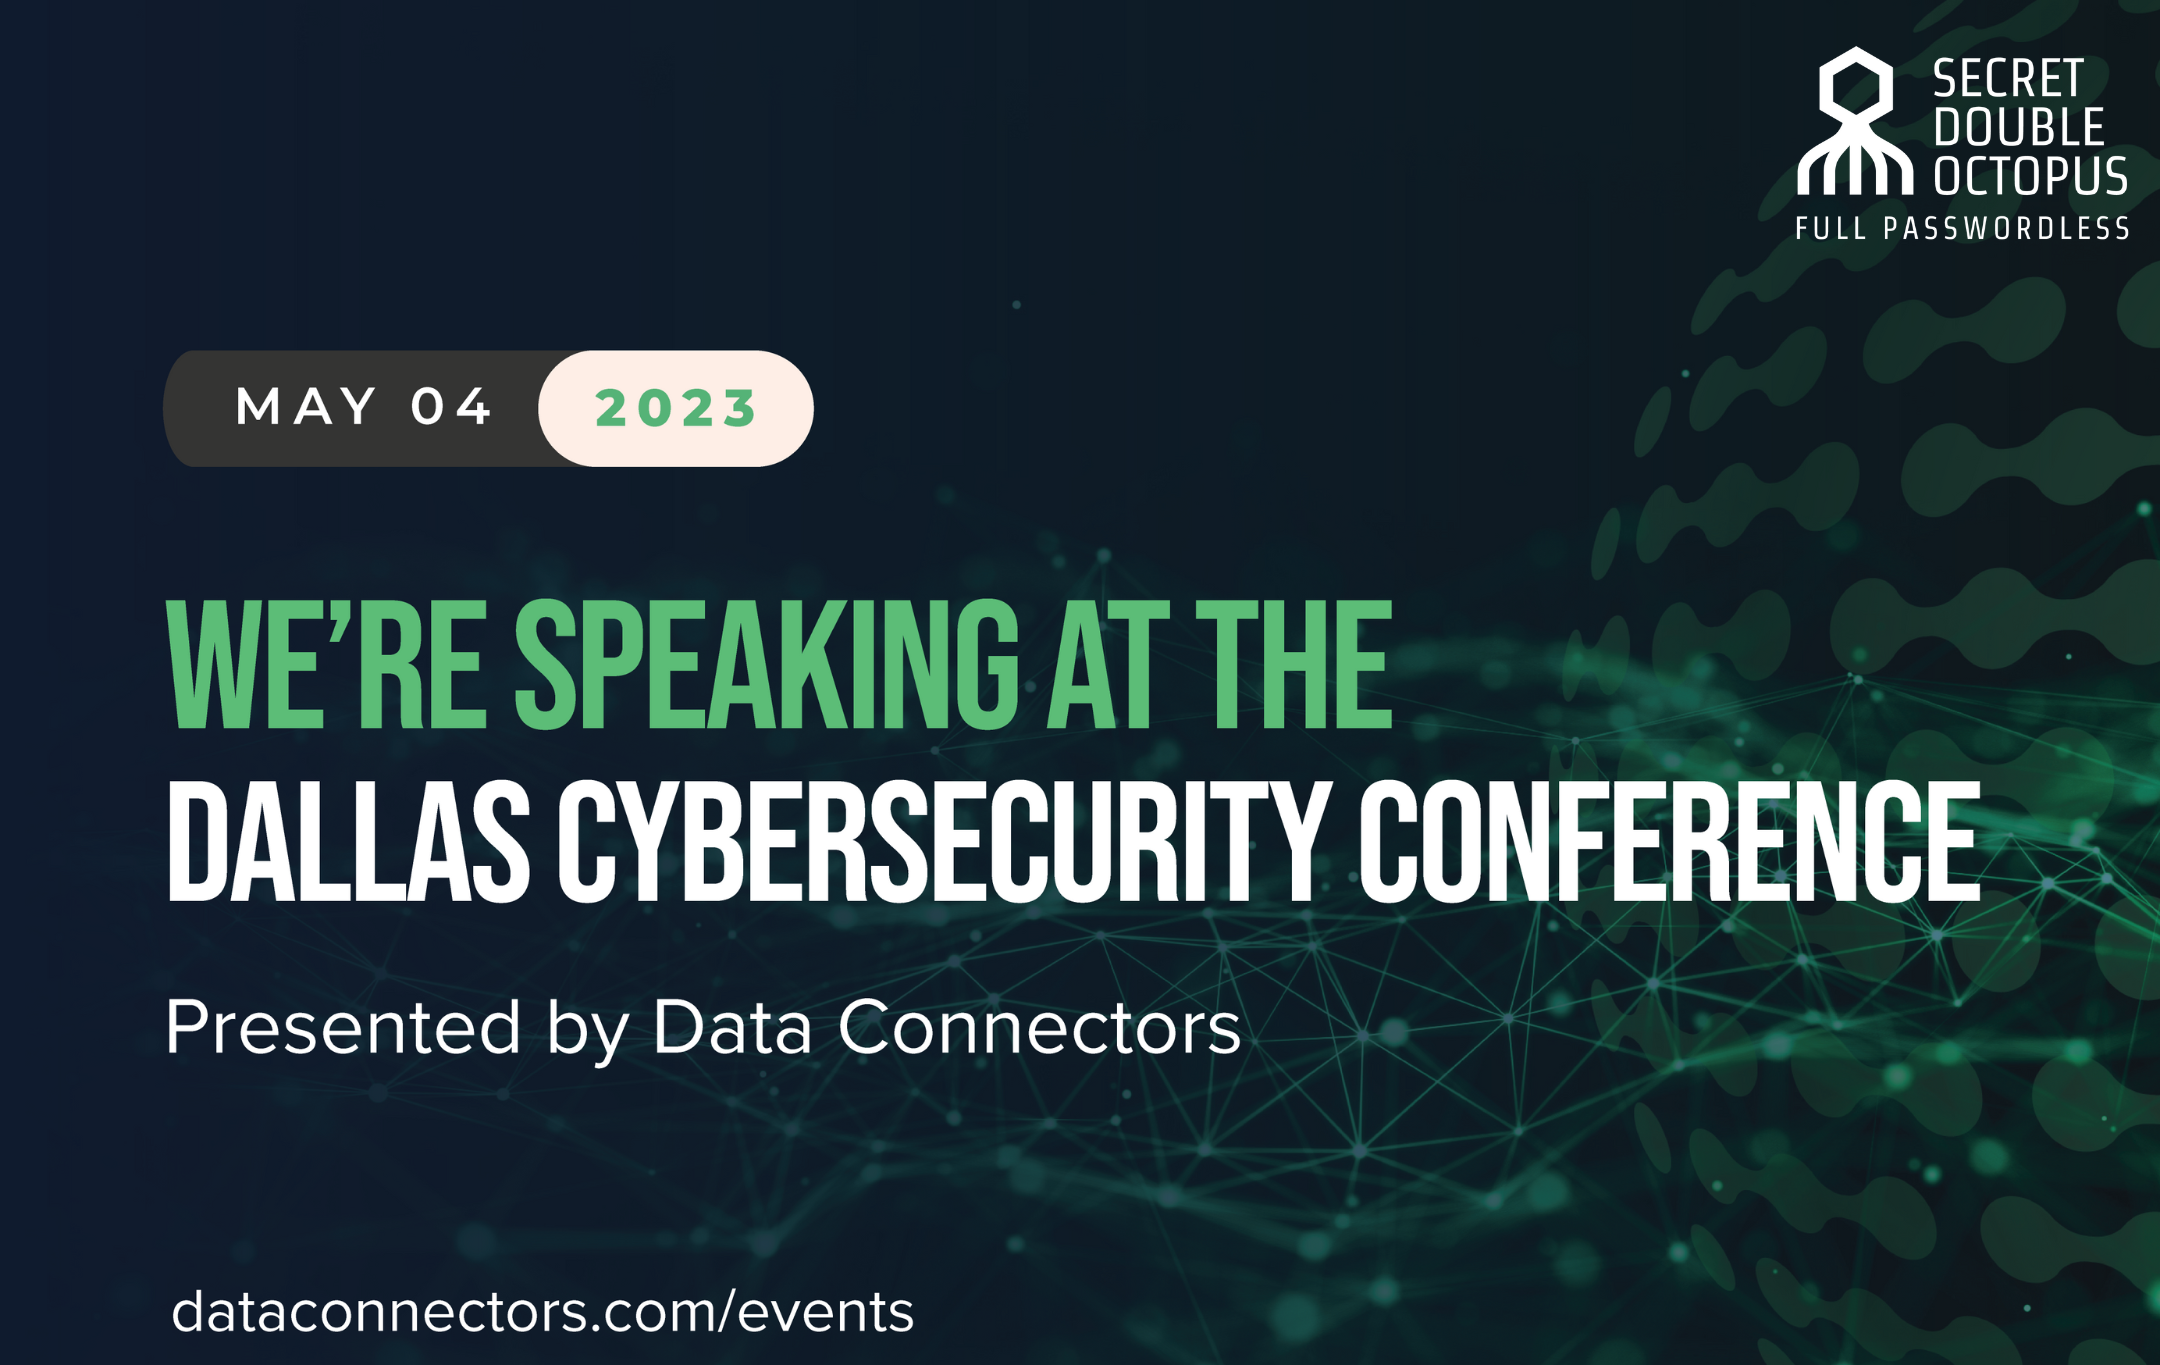 Dallas Cyber Security conference